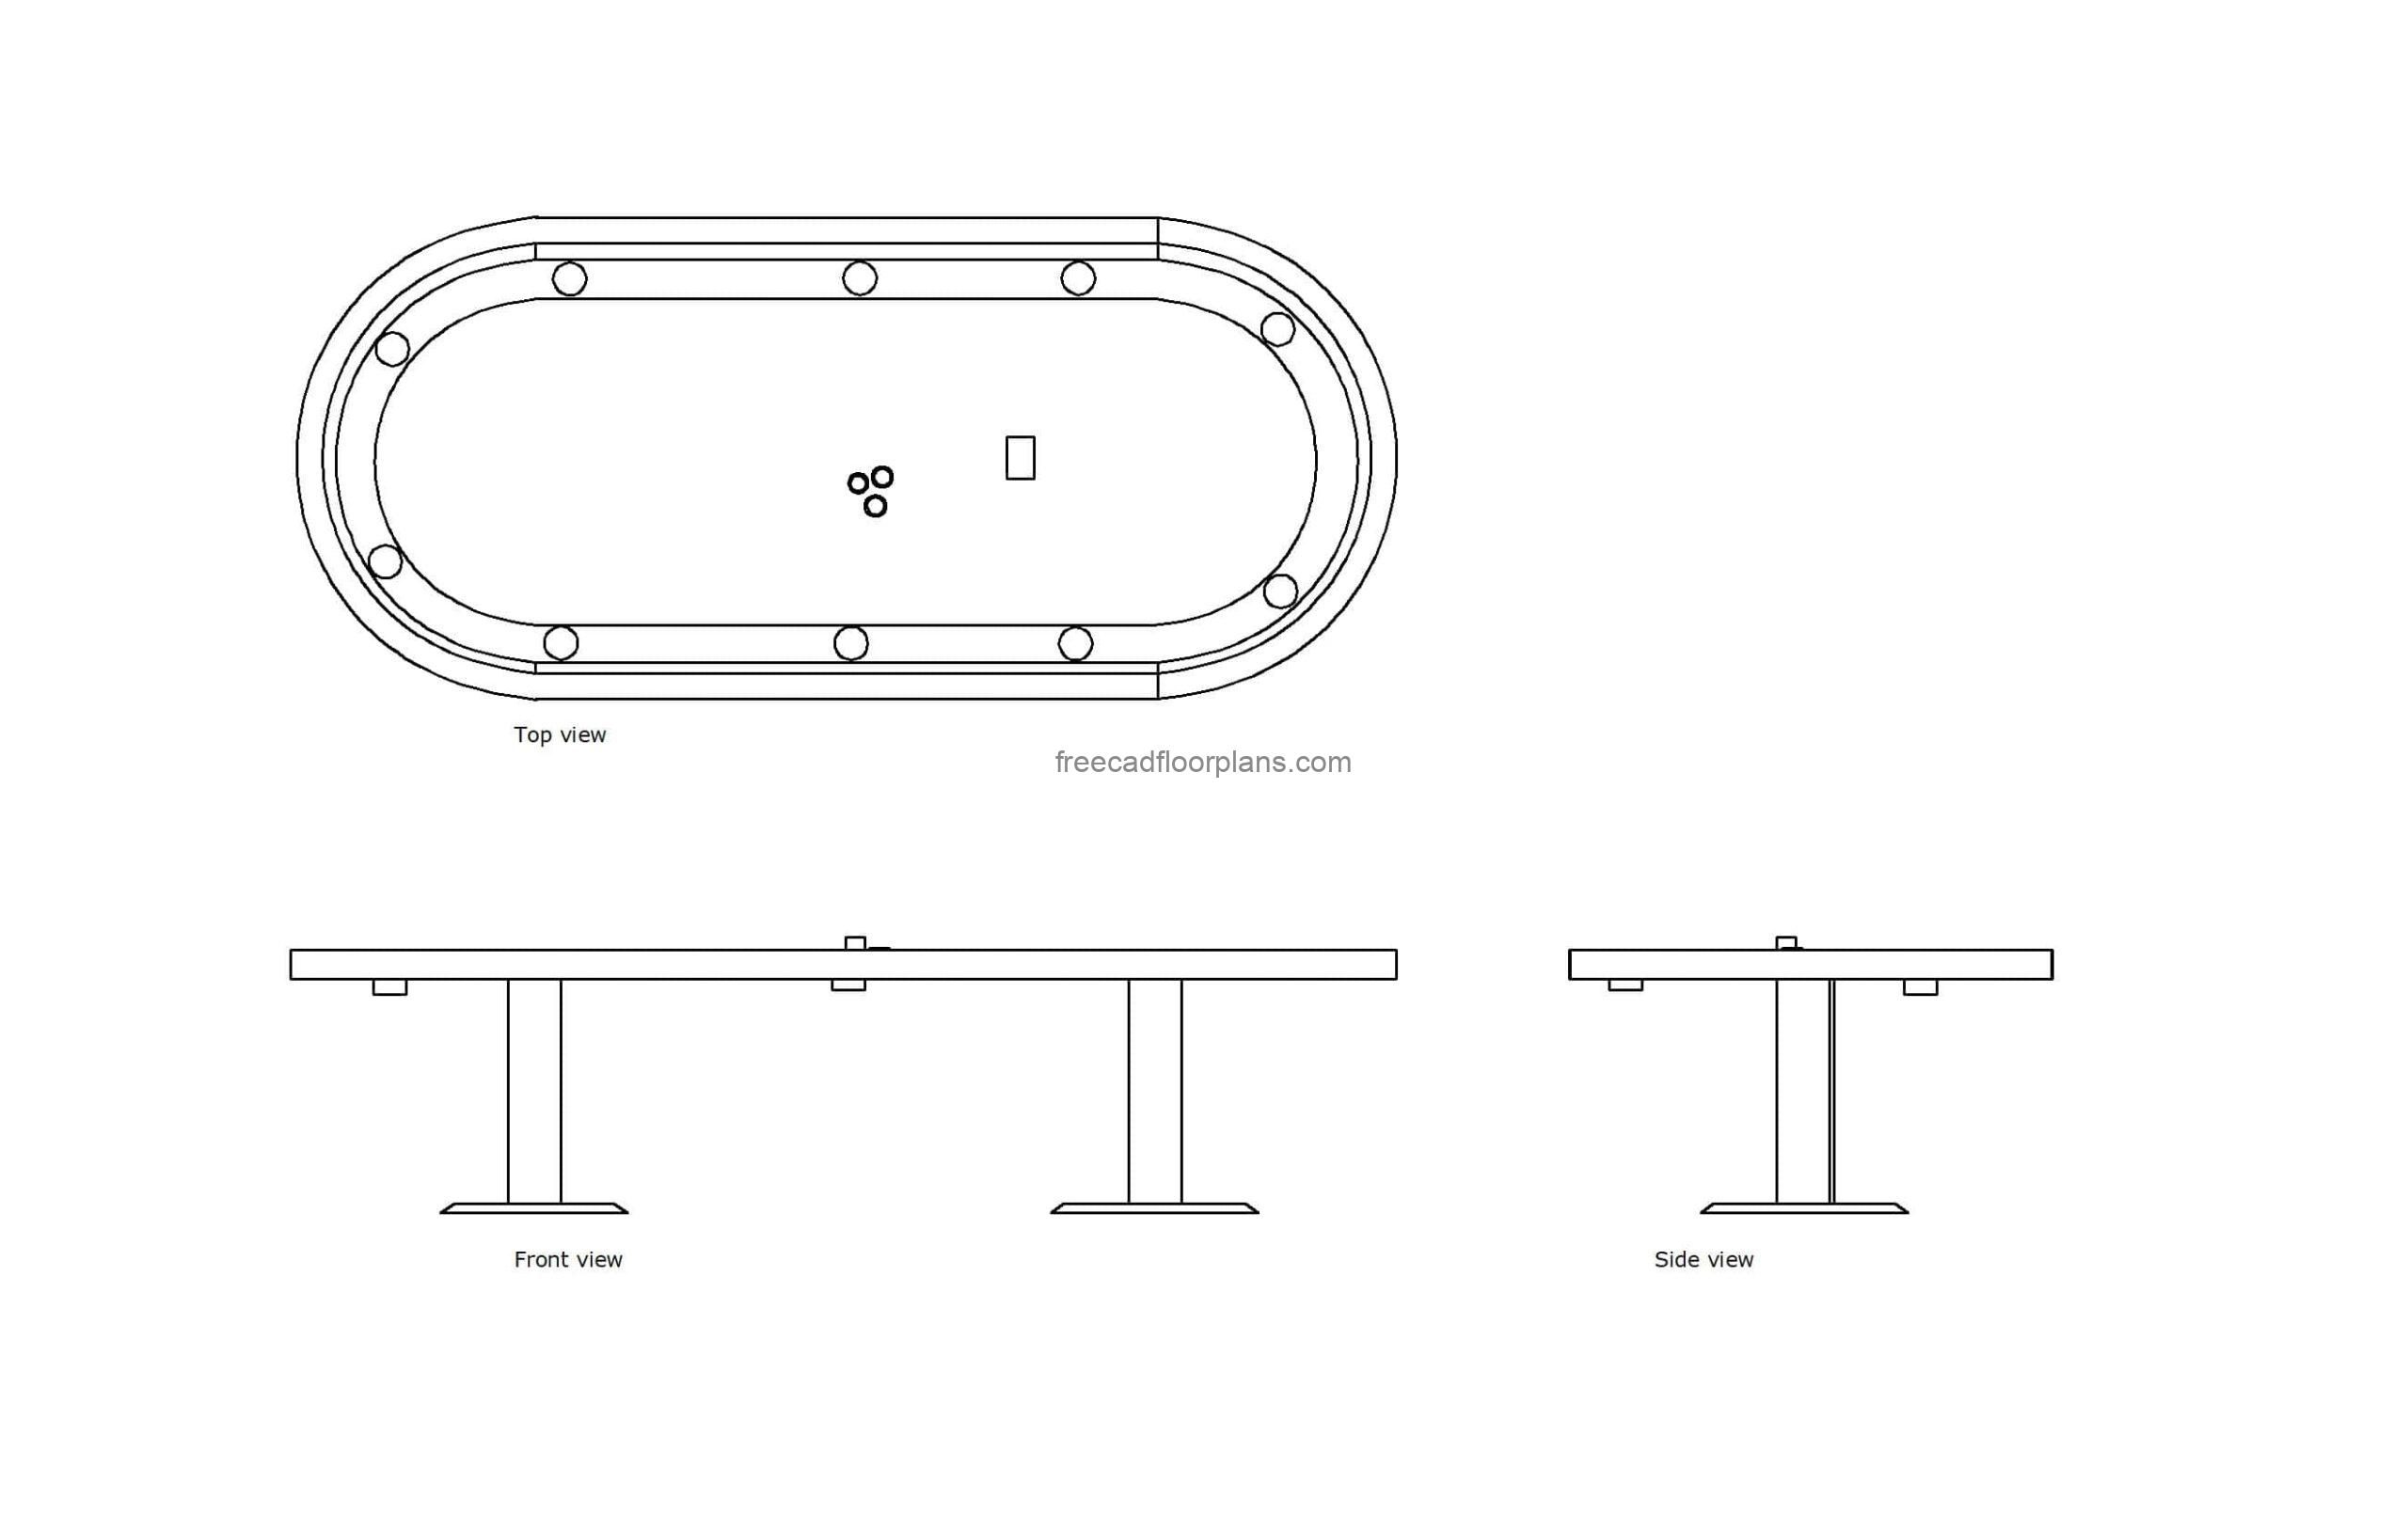 autocad drawing of a casino poker table, plan and elevation 2d views dwg file free for download